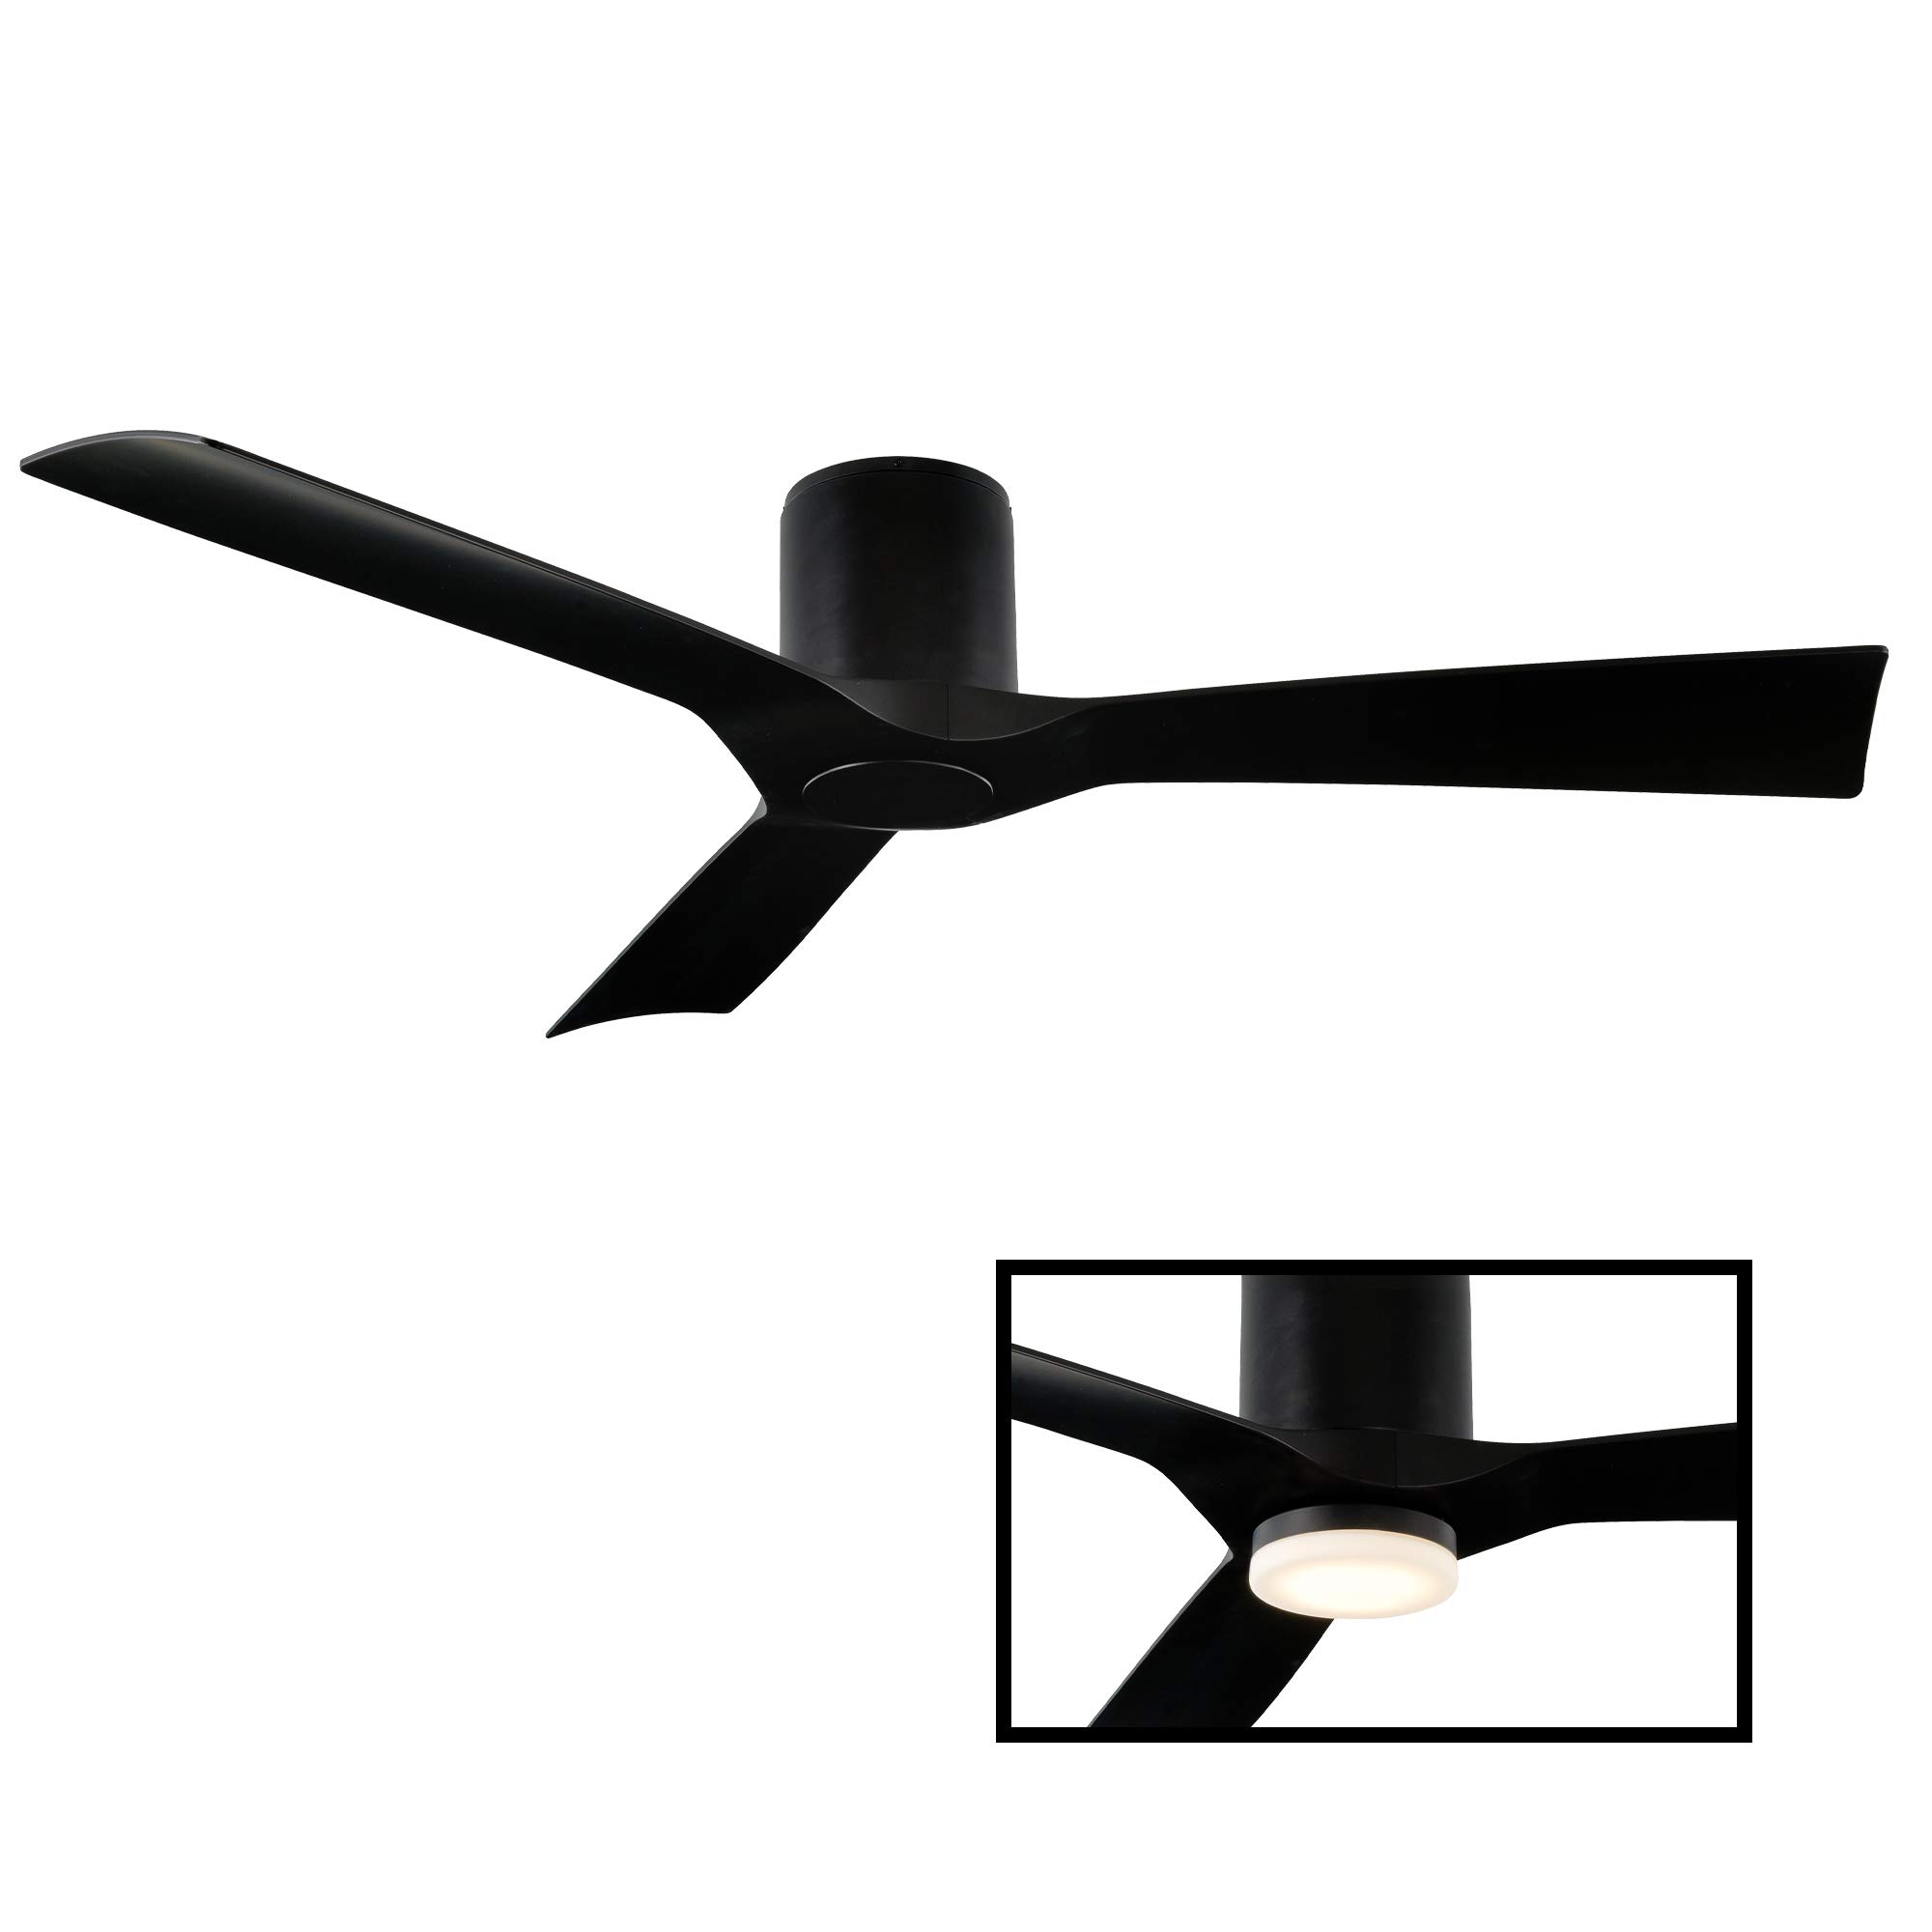 Aviator Smart Indoor and Outdoor 3-Blade Flush Mount Ceiling Fan 54in Matte Black with Remote Control (Light Kit Sold Separately) works with Alexa, Google Assistant, Samsung Things, and iOS or Android App